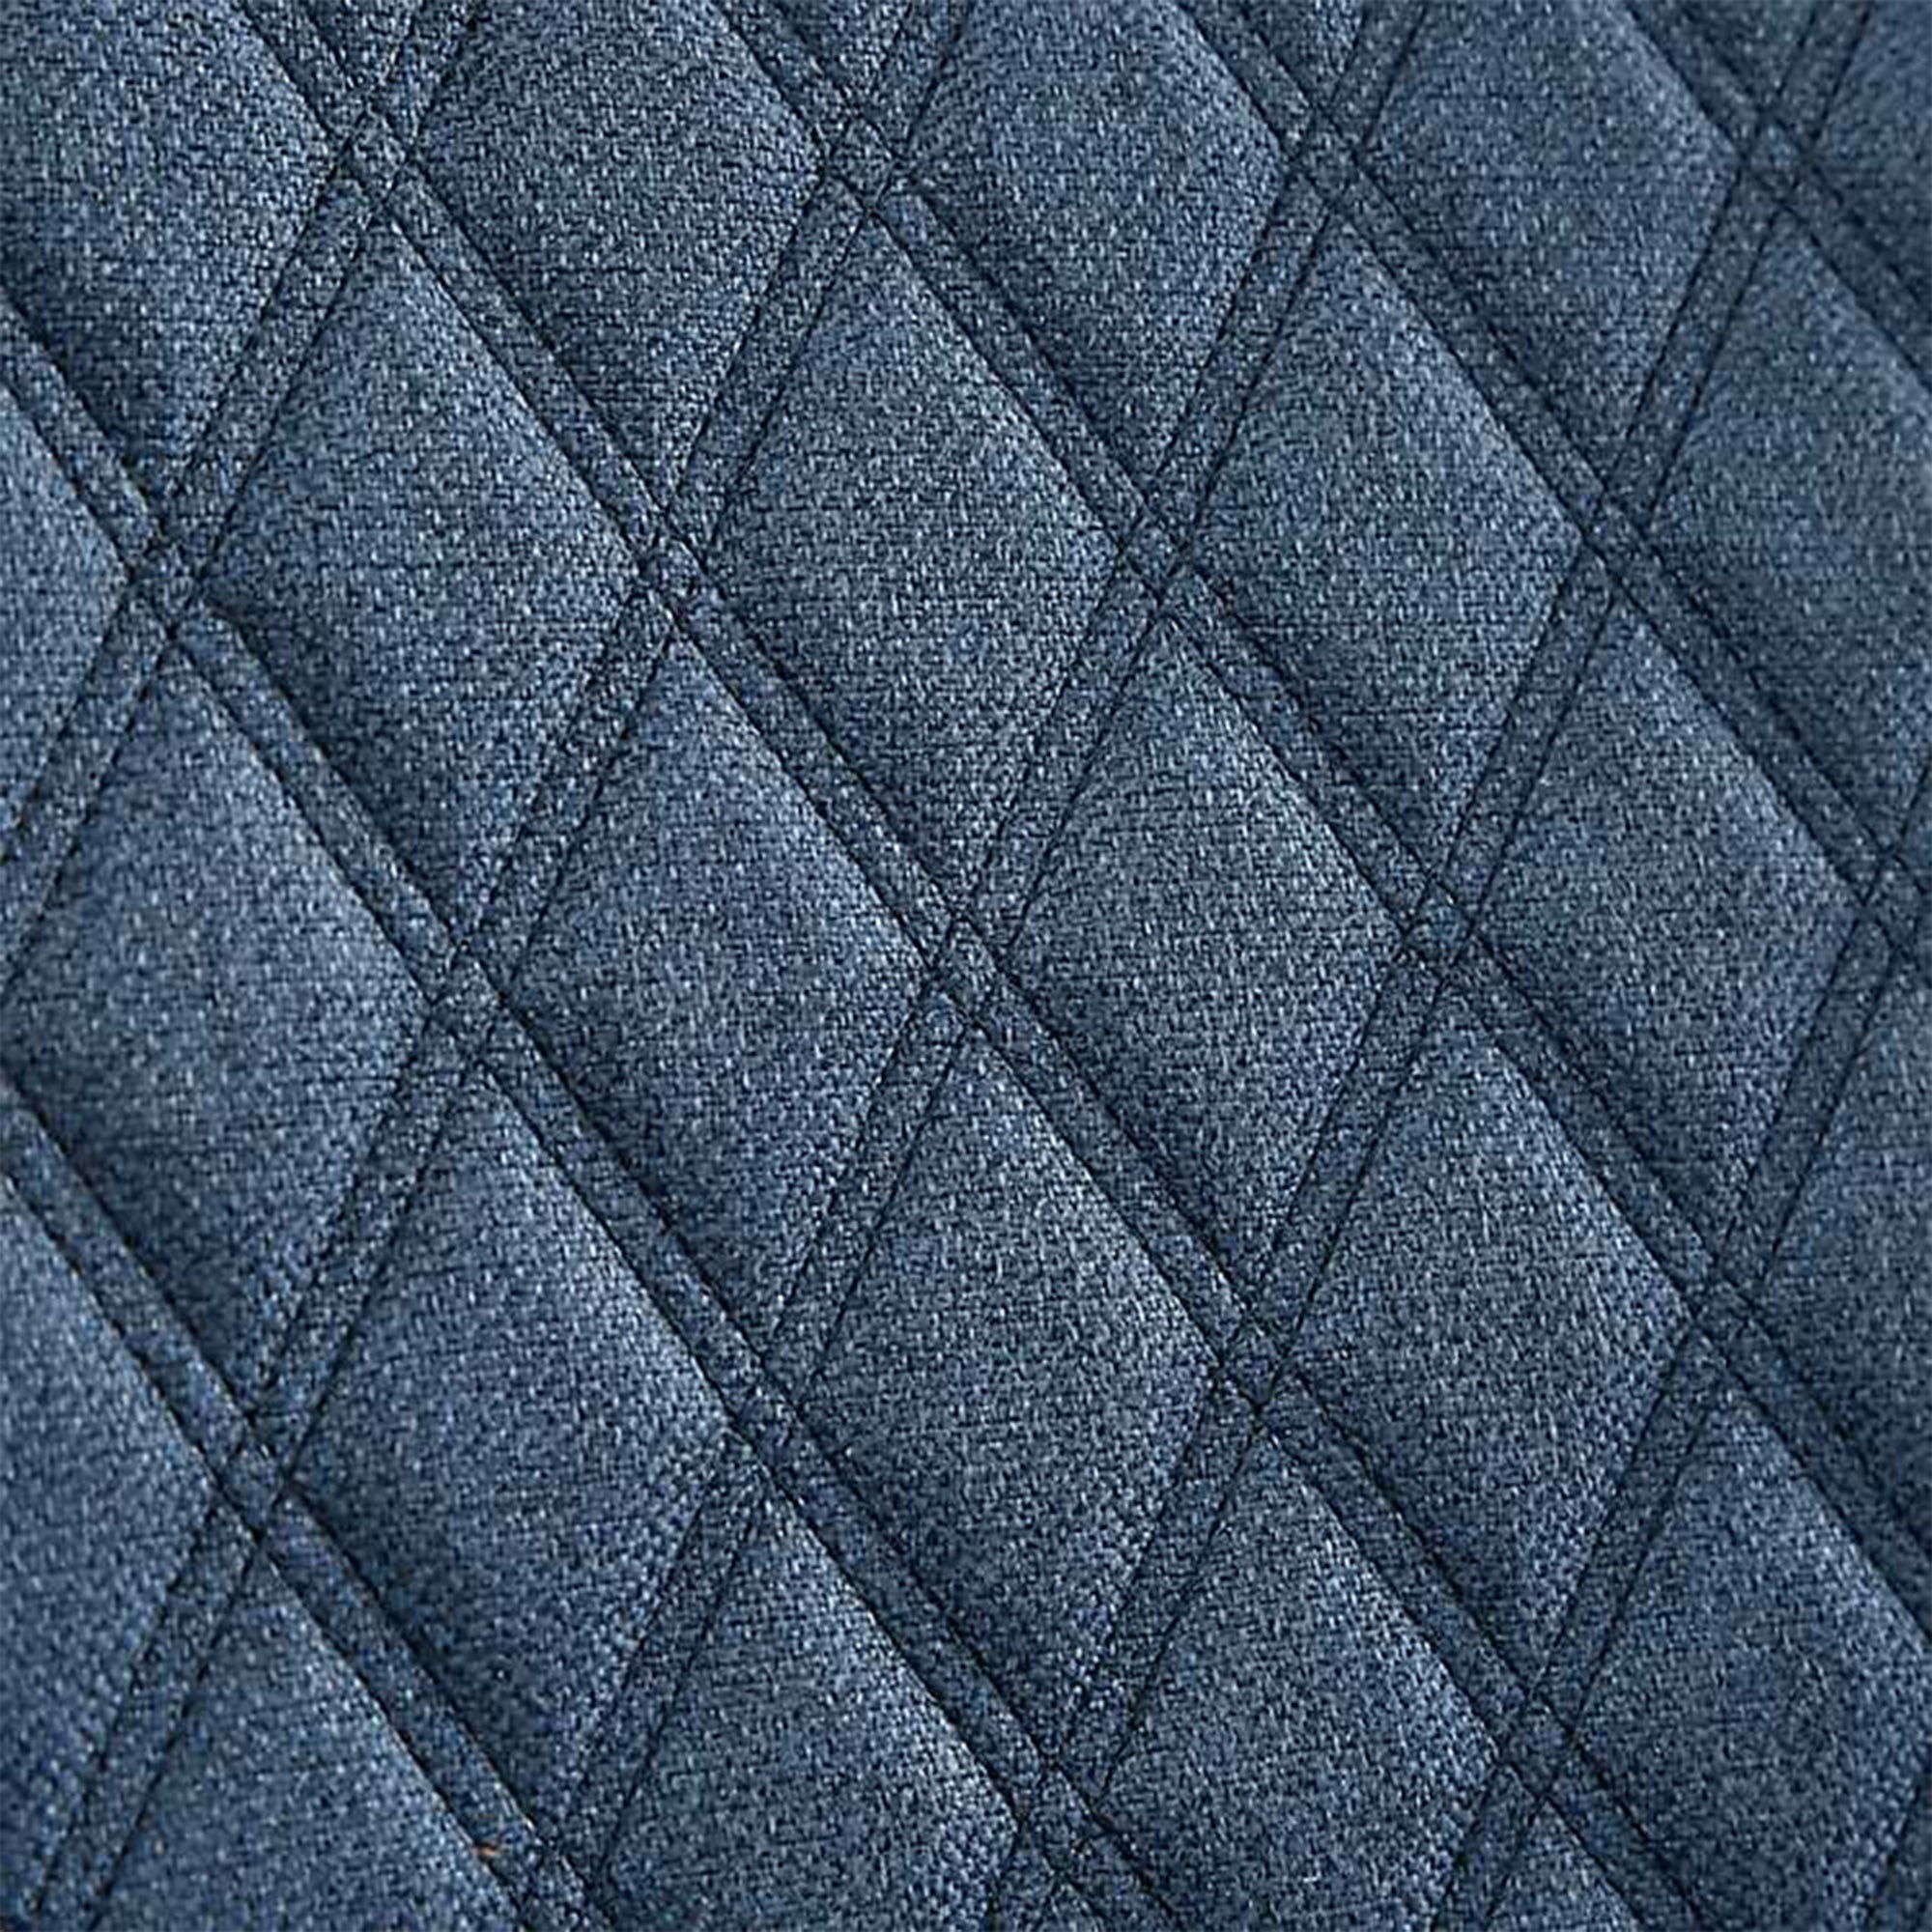 Blue Quilted Nail Trim Accent Chair